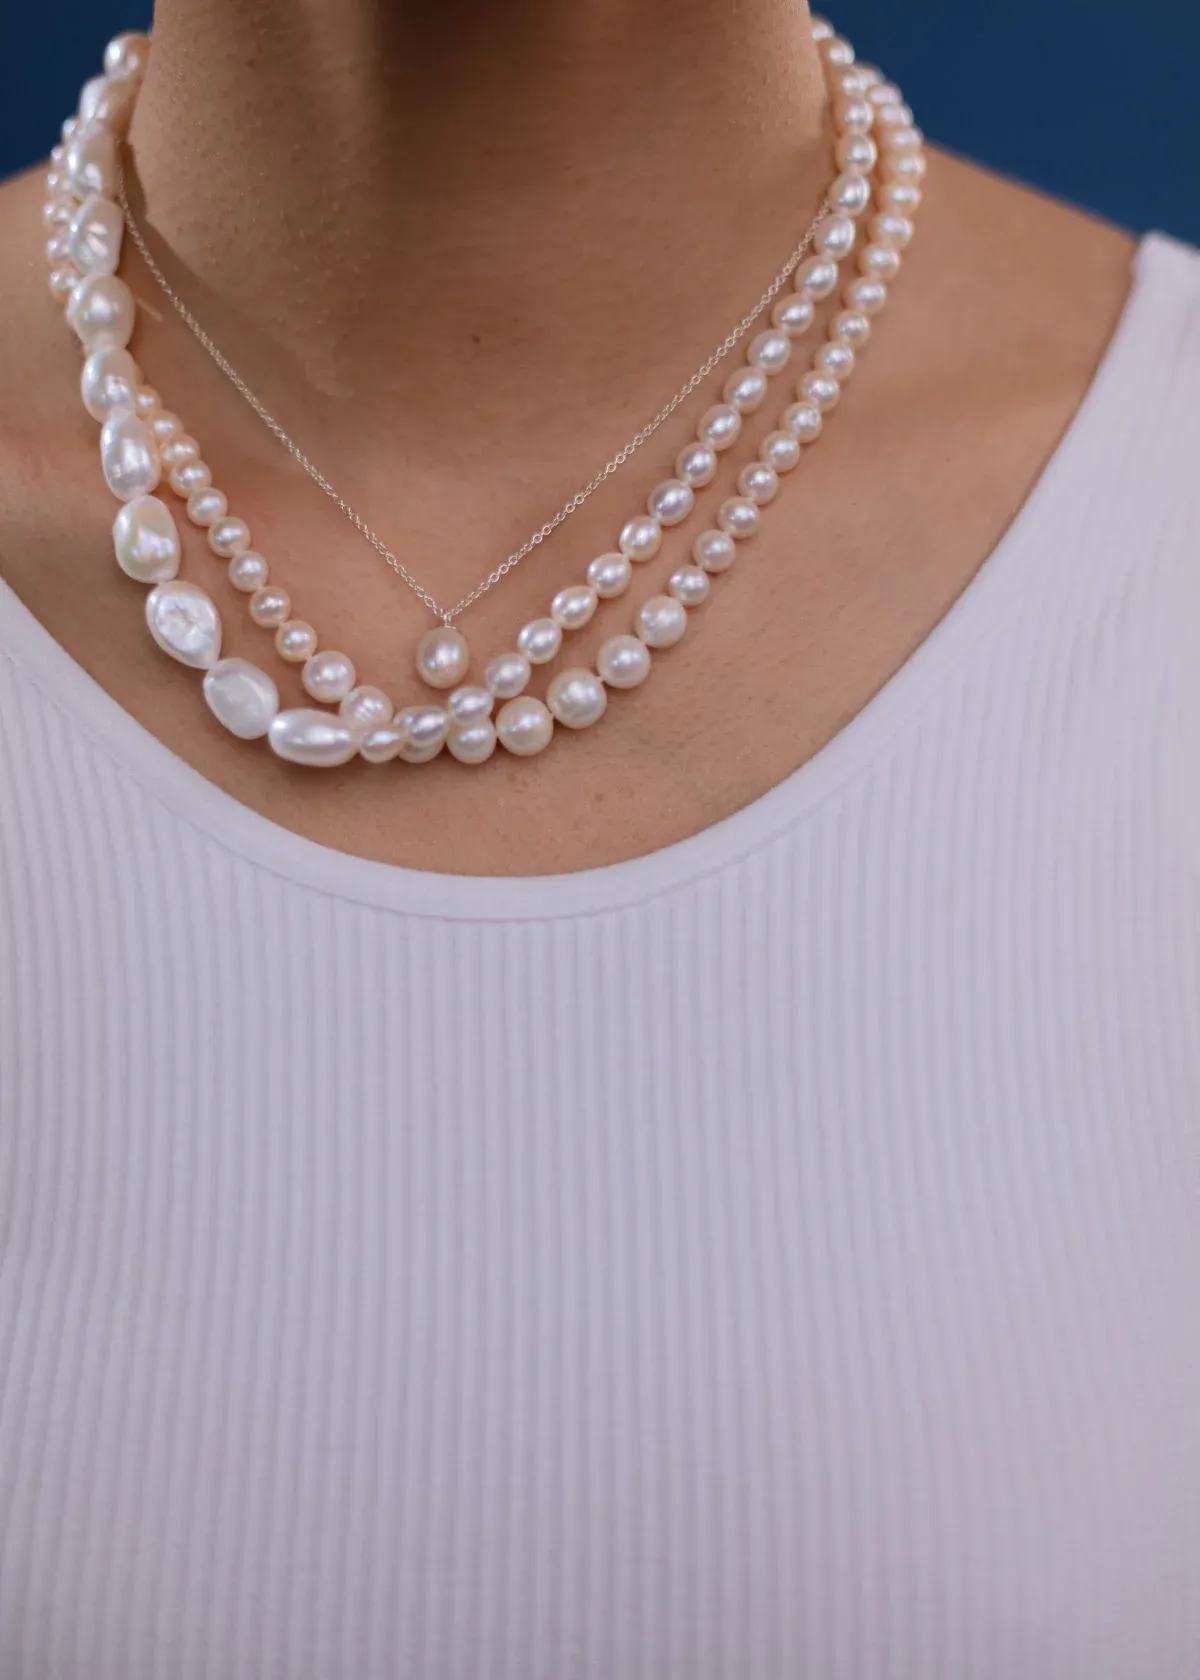 Why do you Choose the Tiny Pearl Necklace?